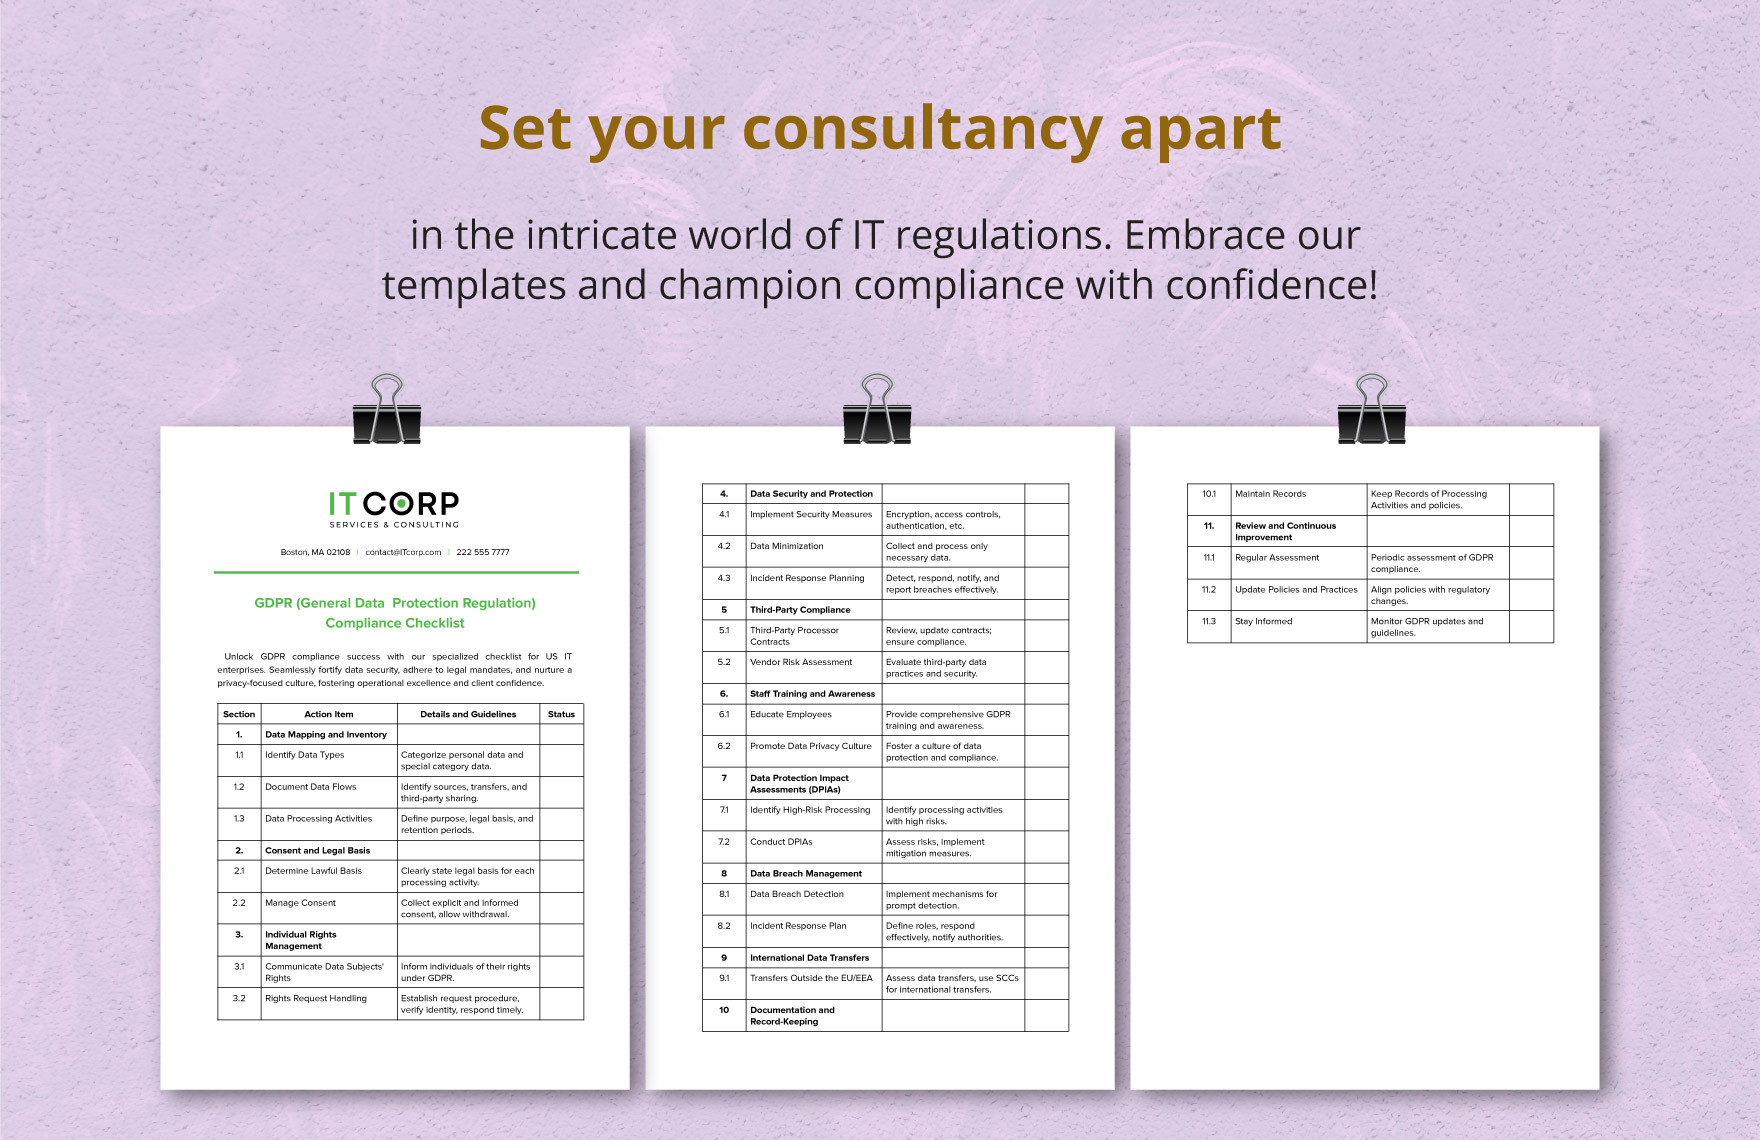 GDPR (General Data Protection Regulation) Compliance Checklist Template